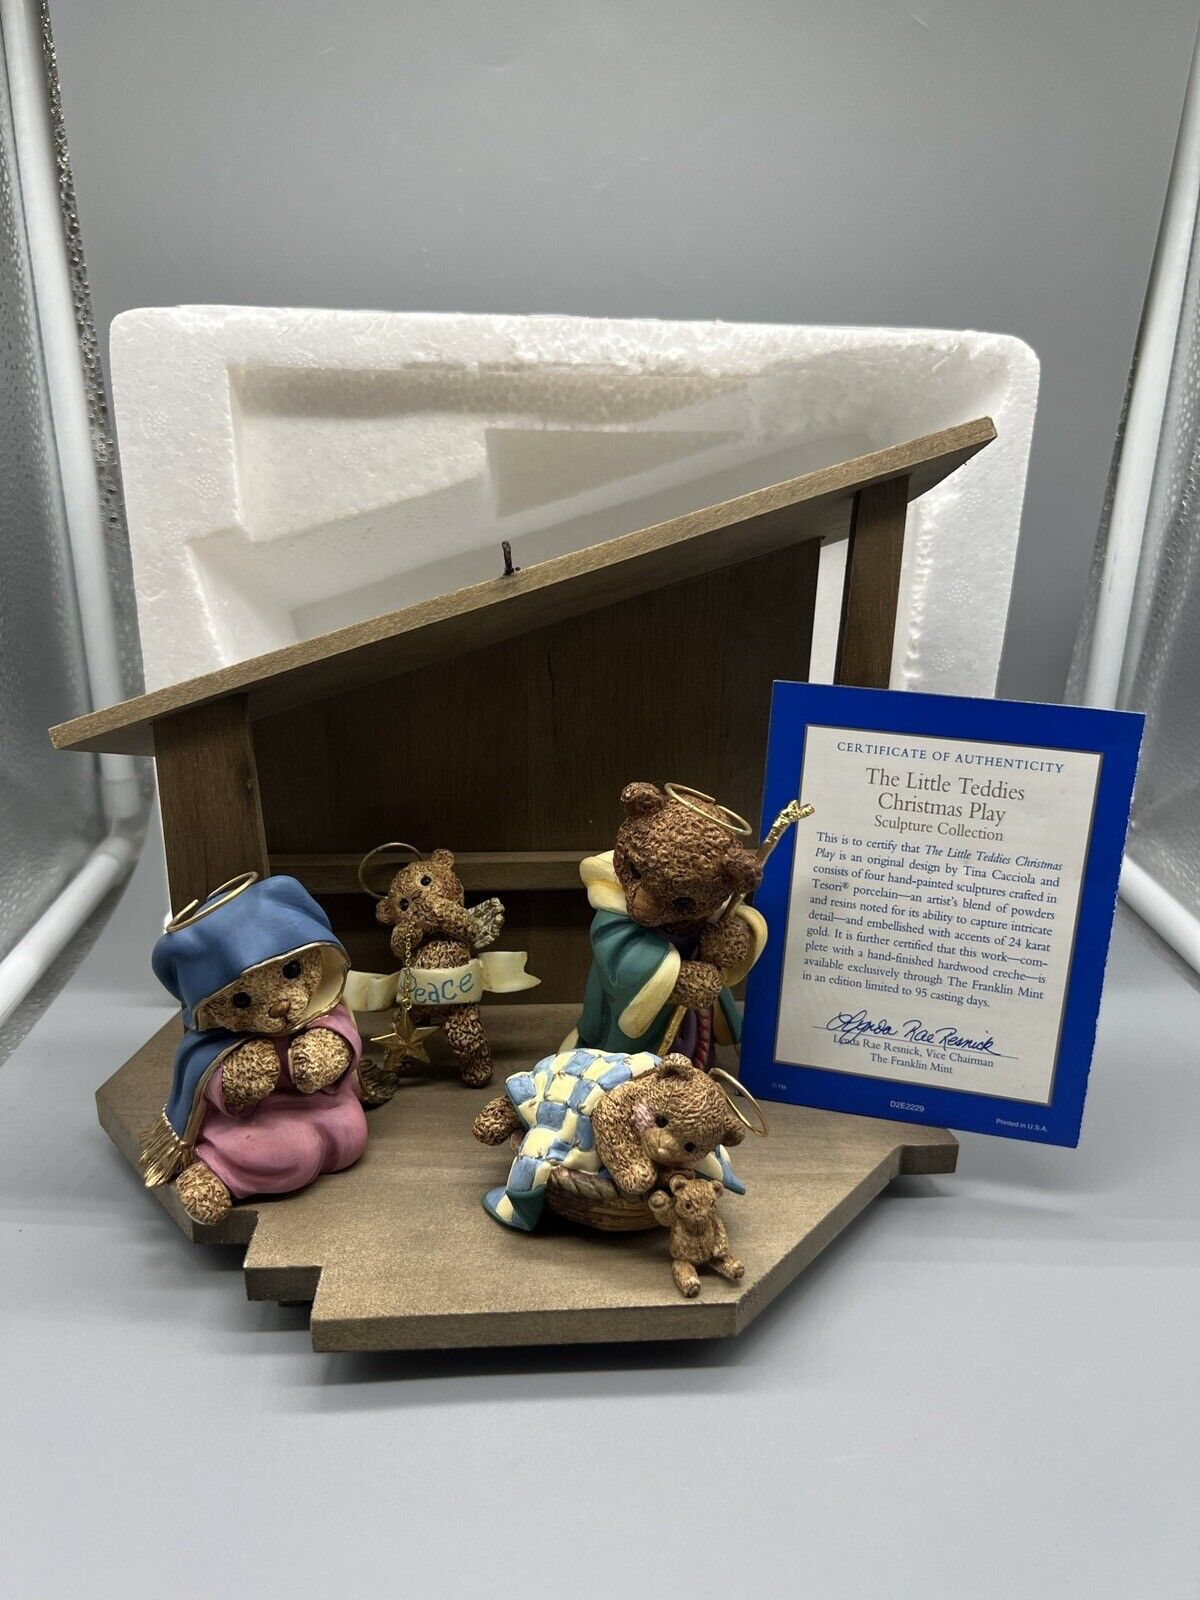 The Little Teddies Christmas Play Sculpture Franklin Mint NEW IN BOX W/ COA